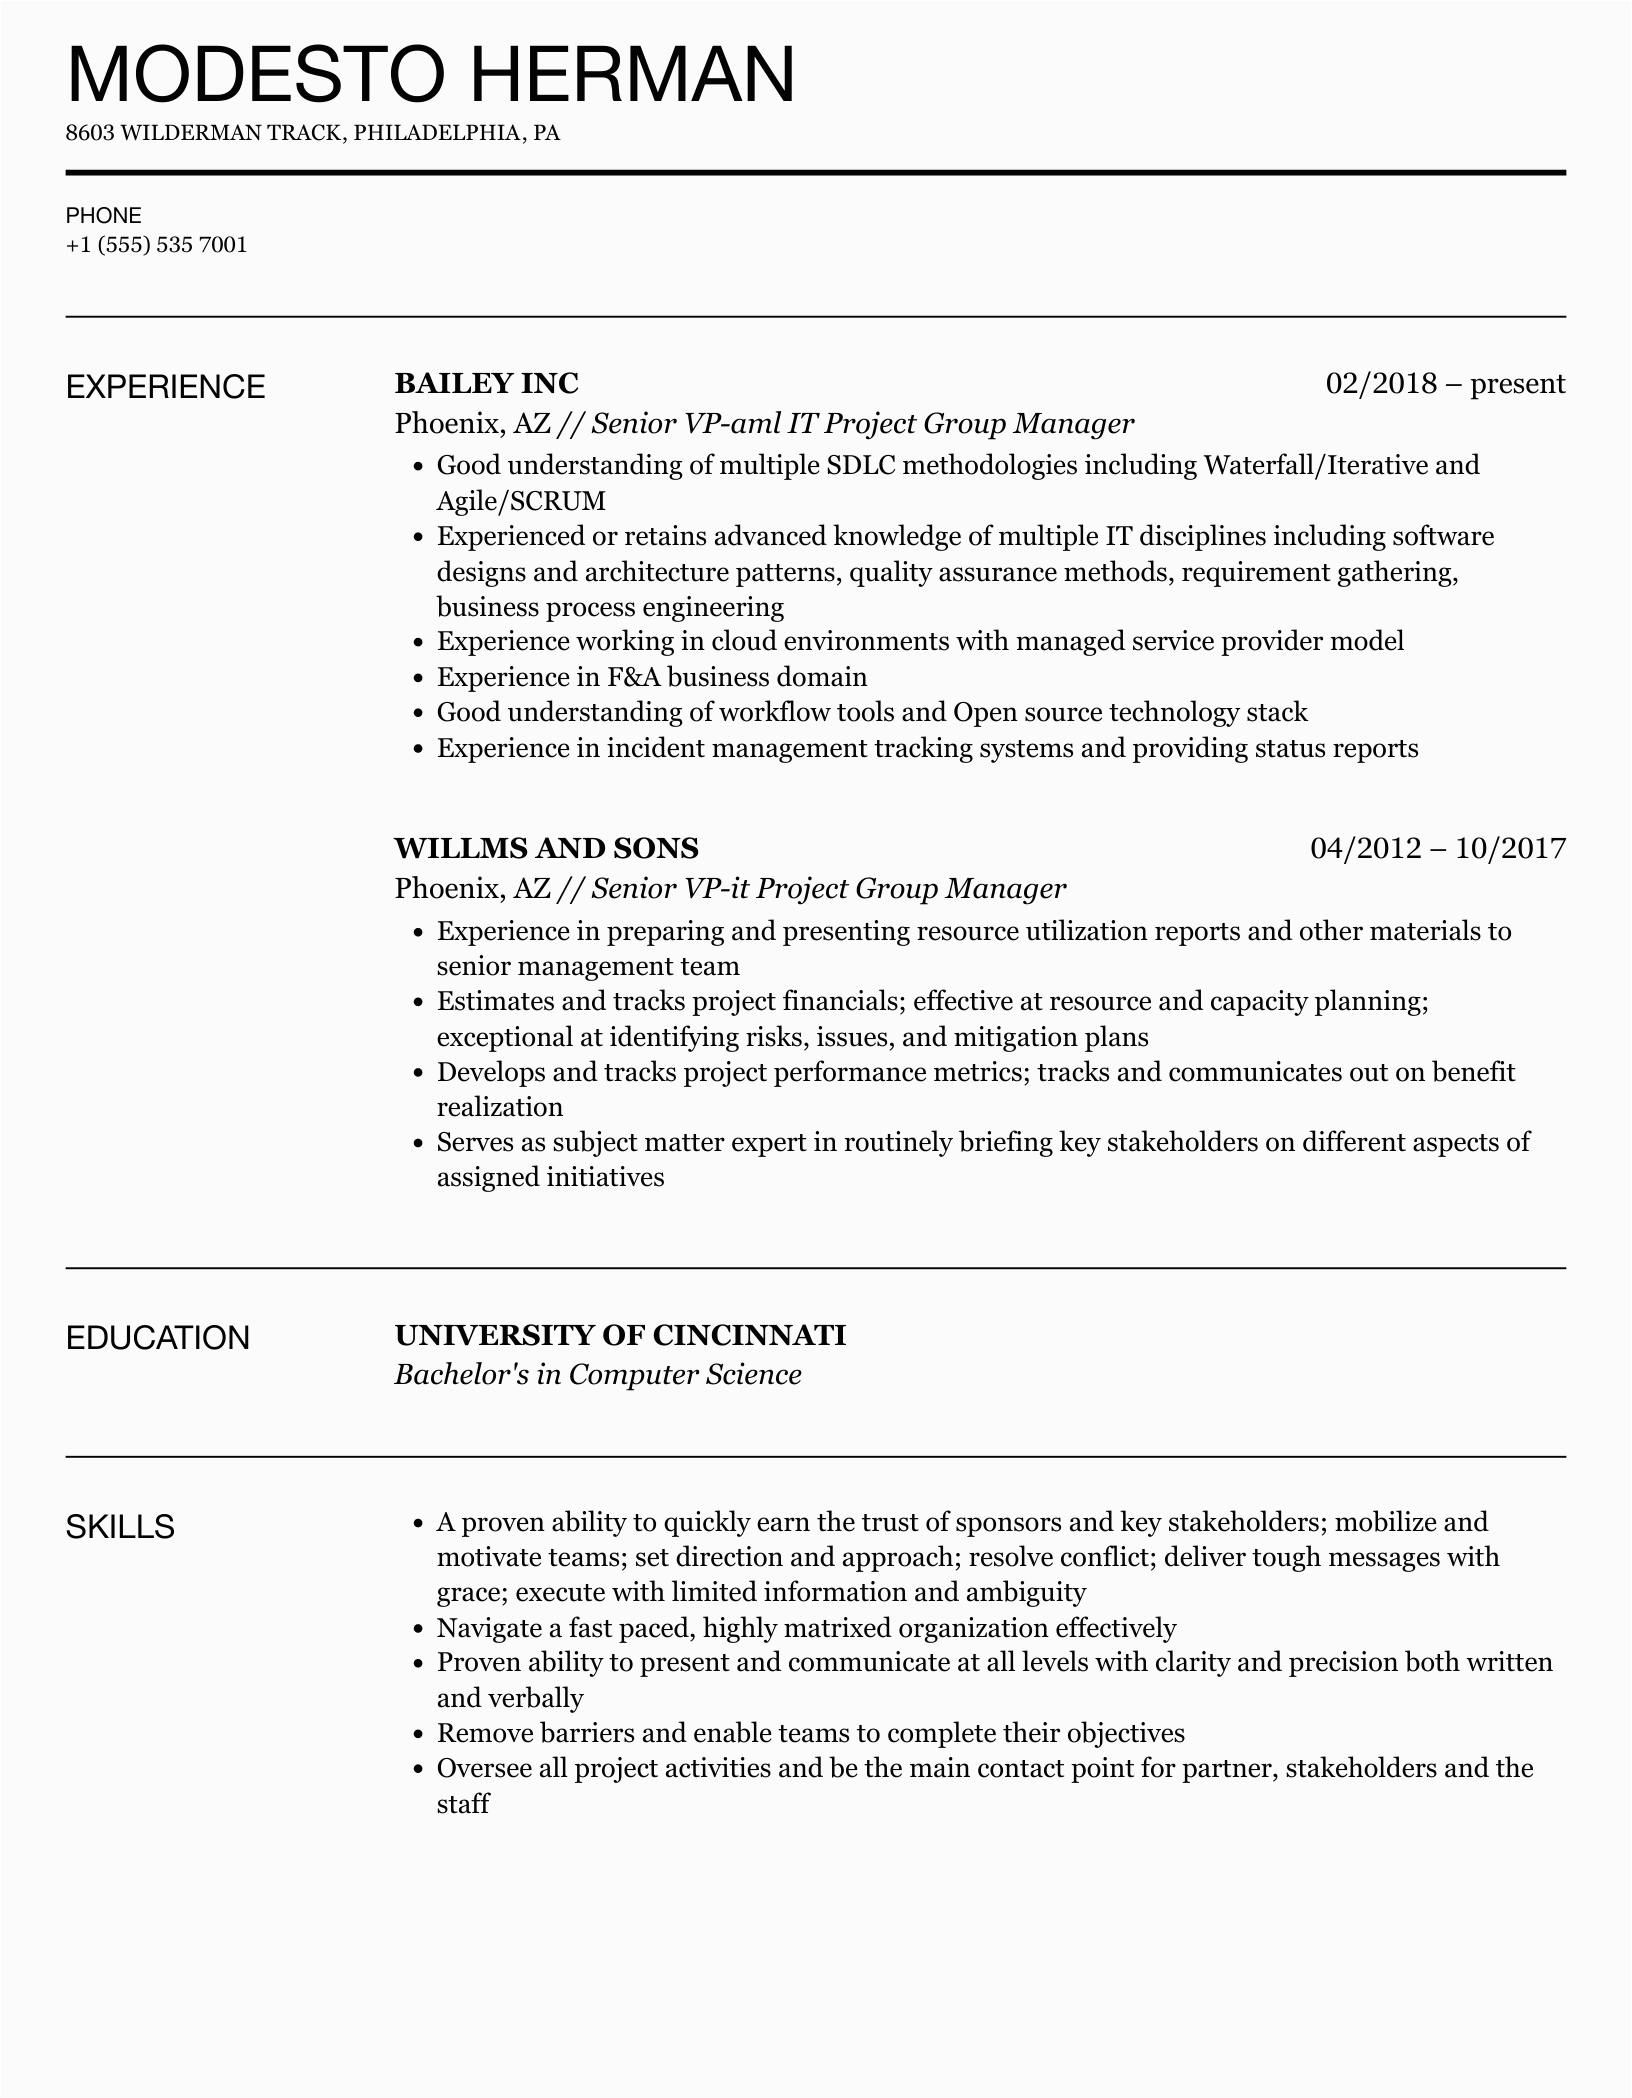 Sample Group Project Info In Resume It Project Group Manager Resume Samples